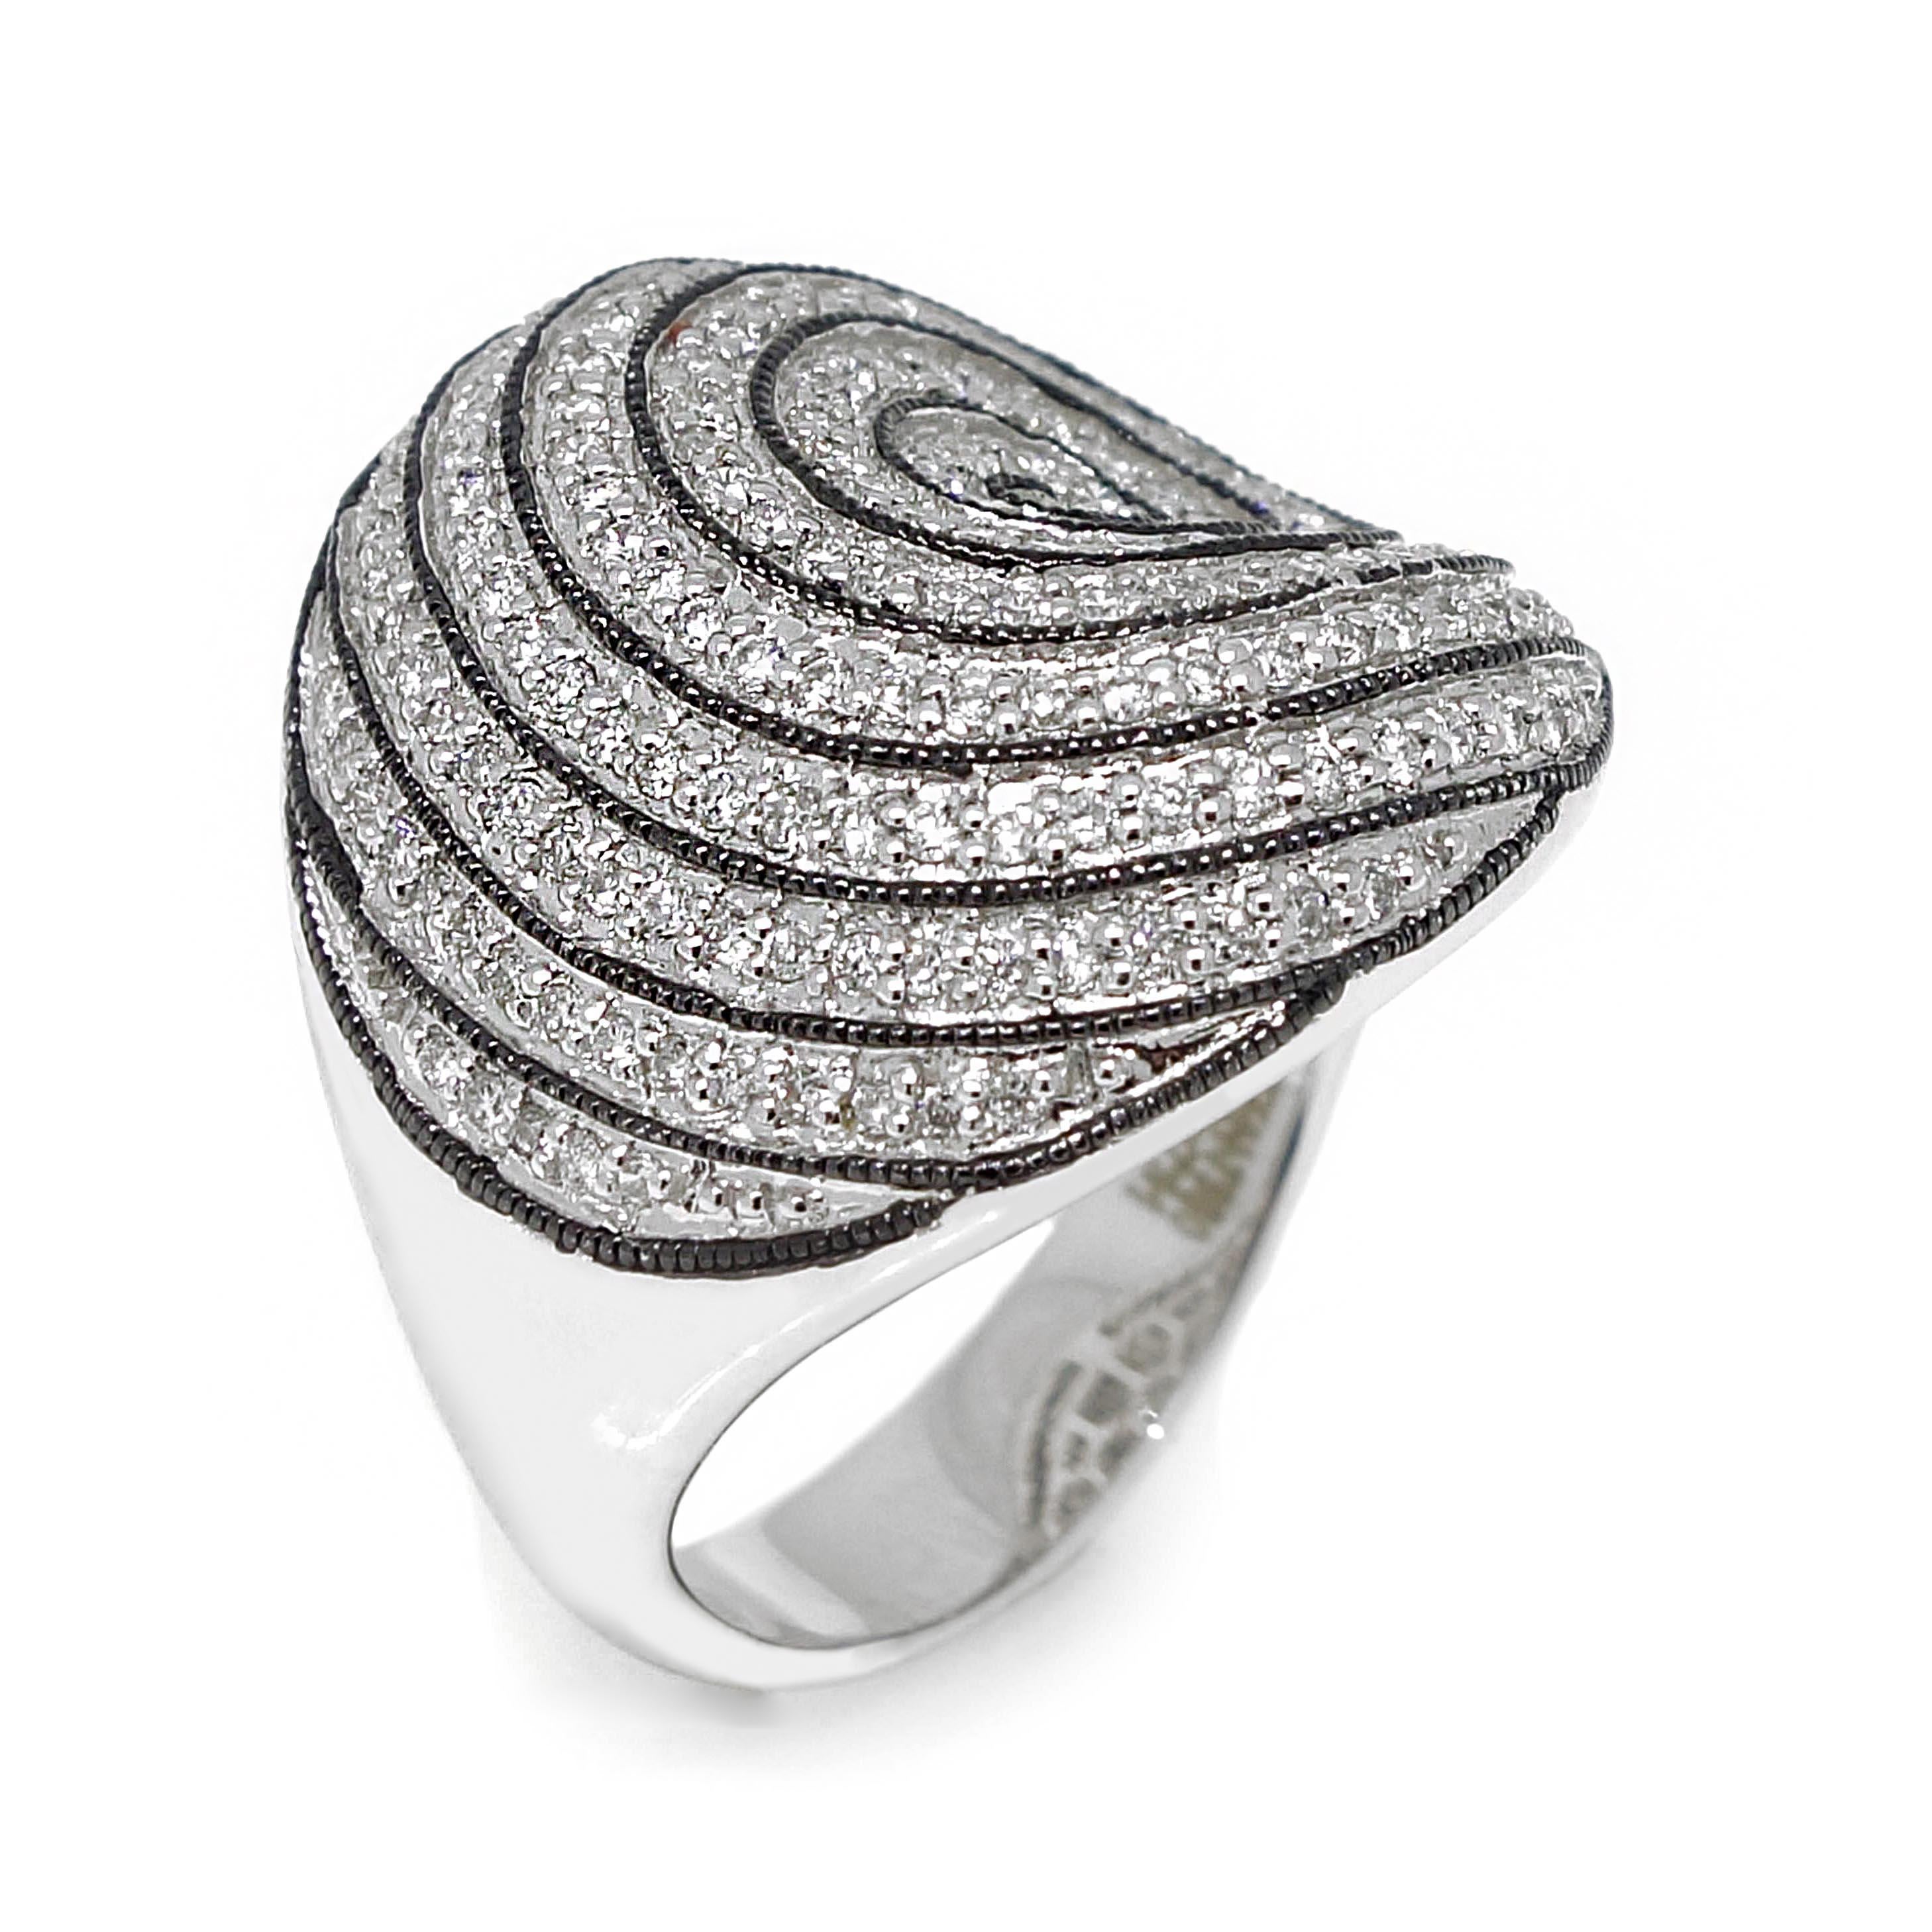 Swirl Diamond ring containing 184 round brilliant cut diamonds of about 0.71 carats with a clarity of SI and color G. All diamonds are set in 18k white gold with a touch of black rhodium accentuate the swirl from the center to the outer side of the